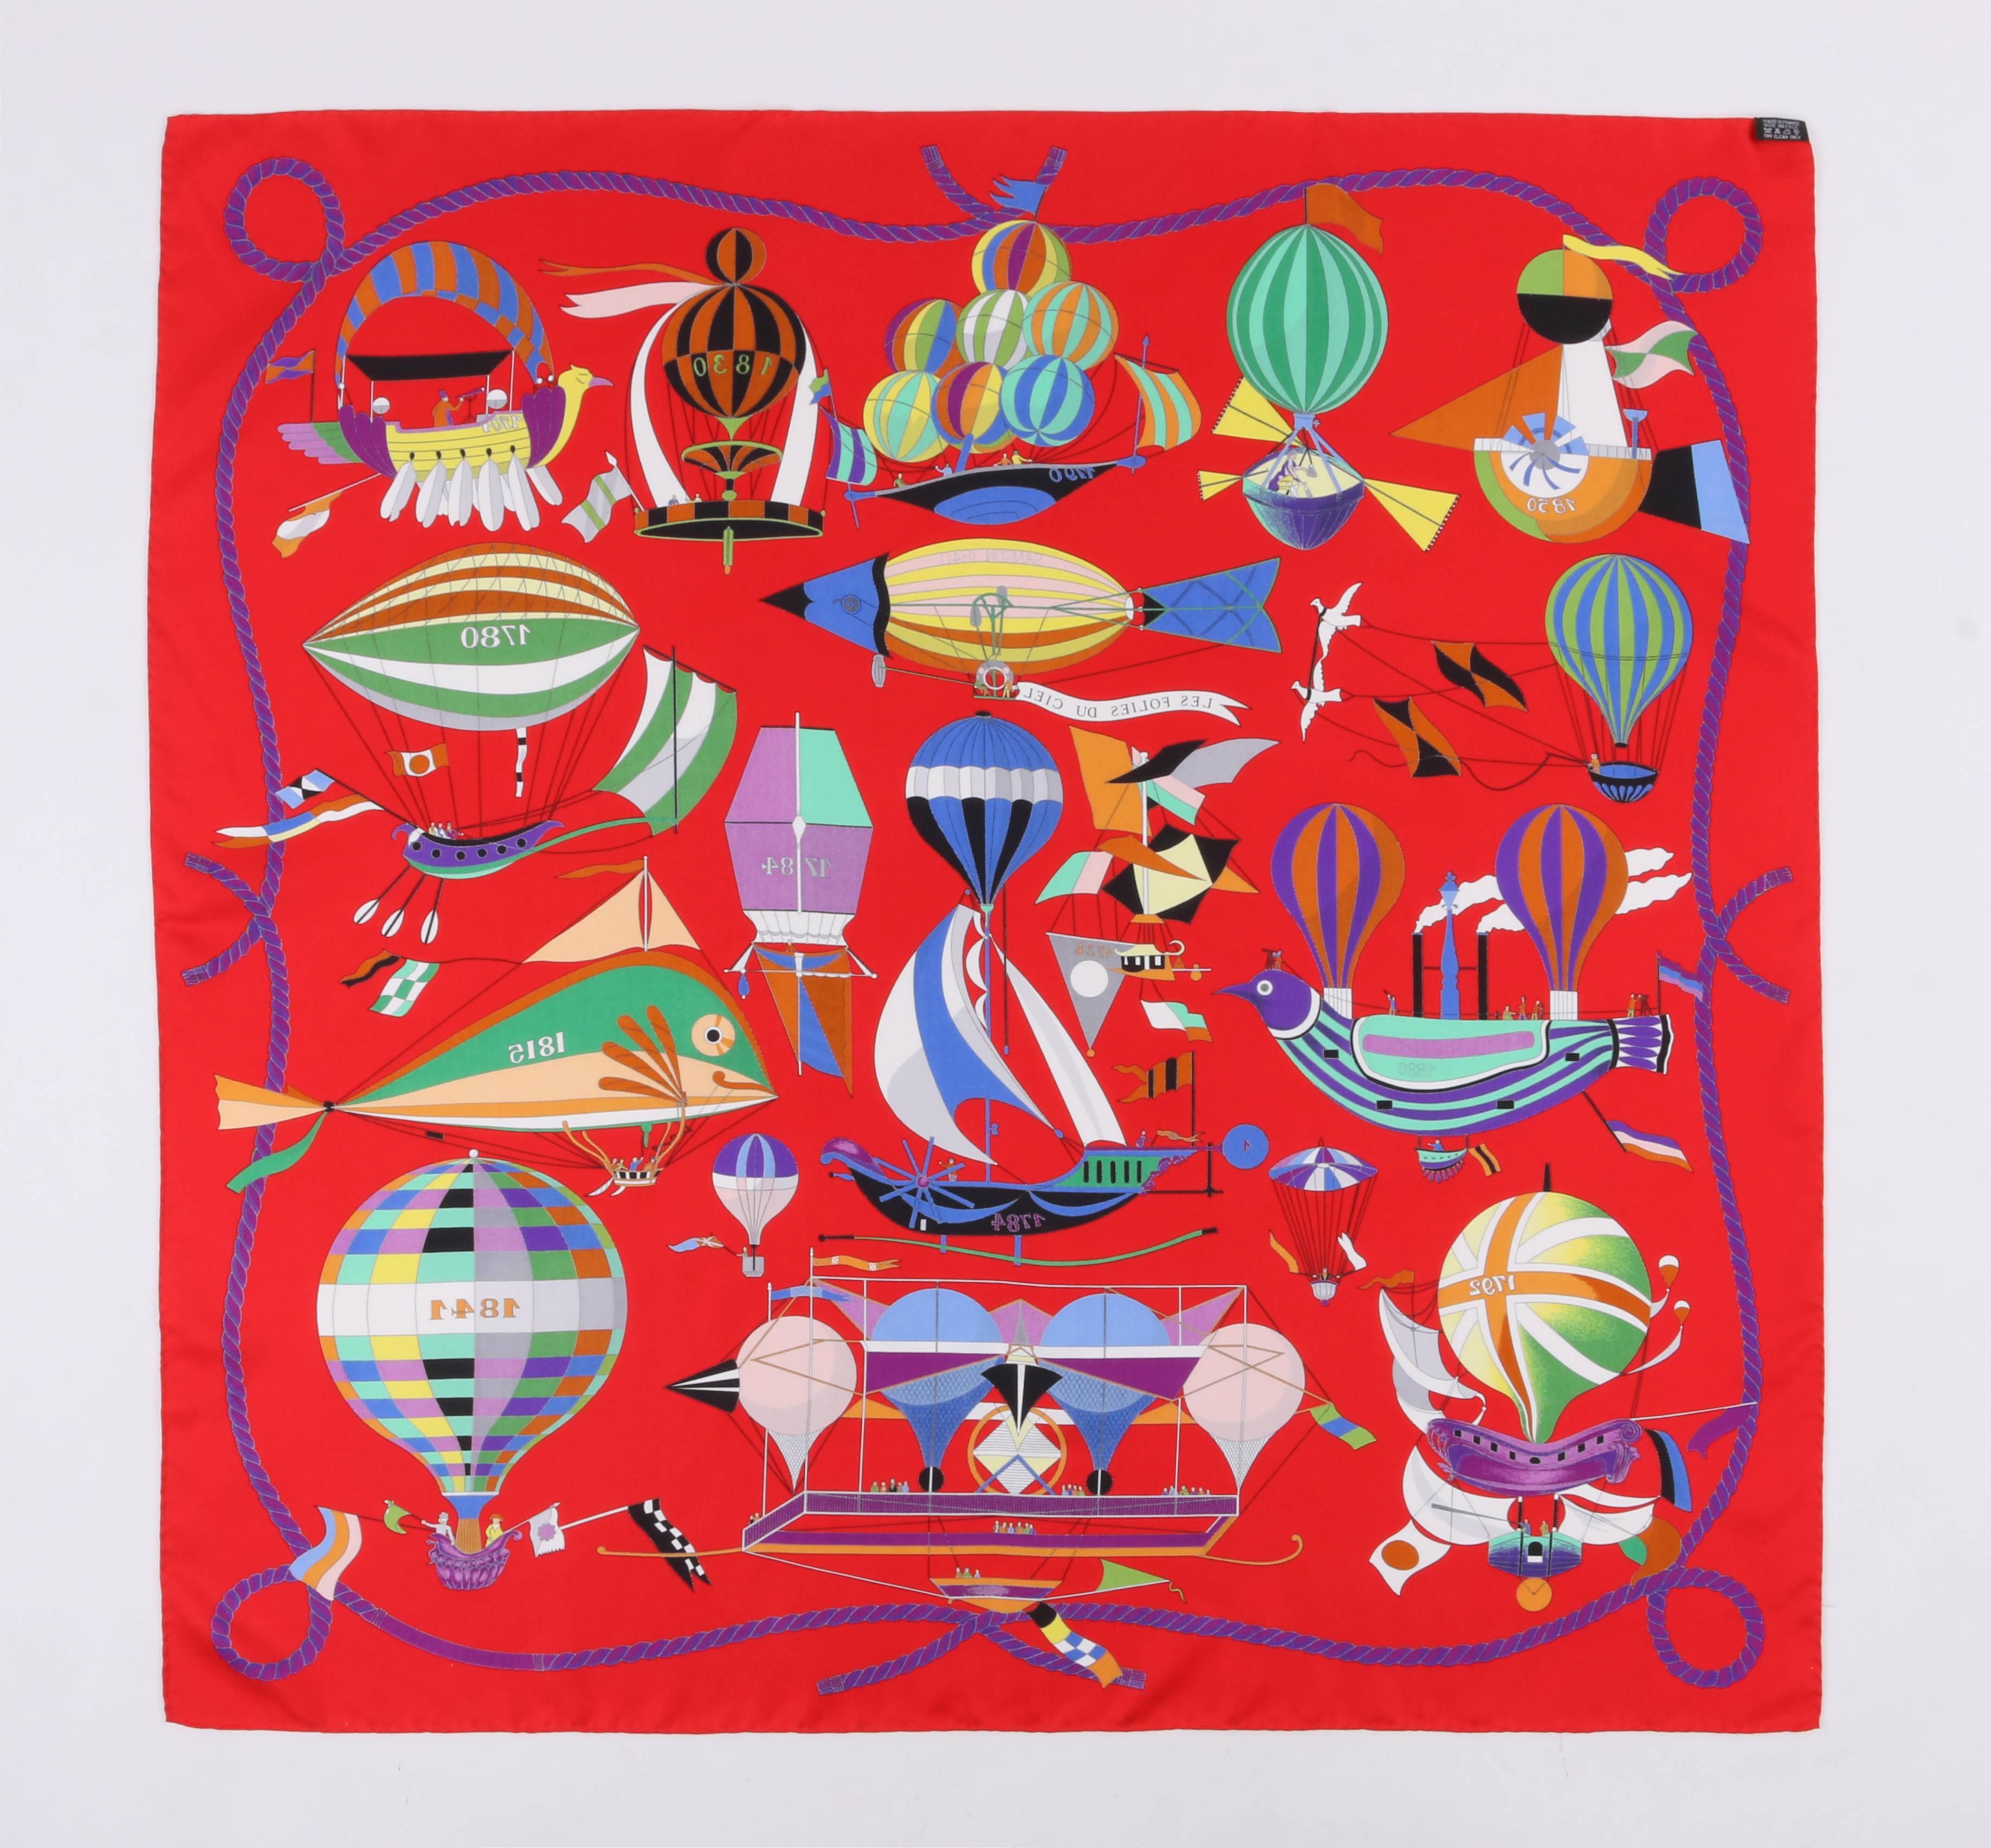 Hermes Spring/Summer 2009 "Les Folies Du Ciel" silk twill scarf designed by Loic Dubigeon. Original scarf design released in 1984. Red background with purple rope boarder print. Bright multi-color vintage flying machines marked with their